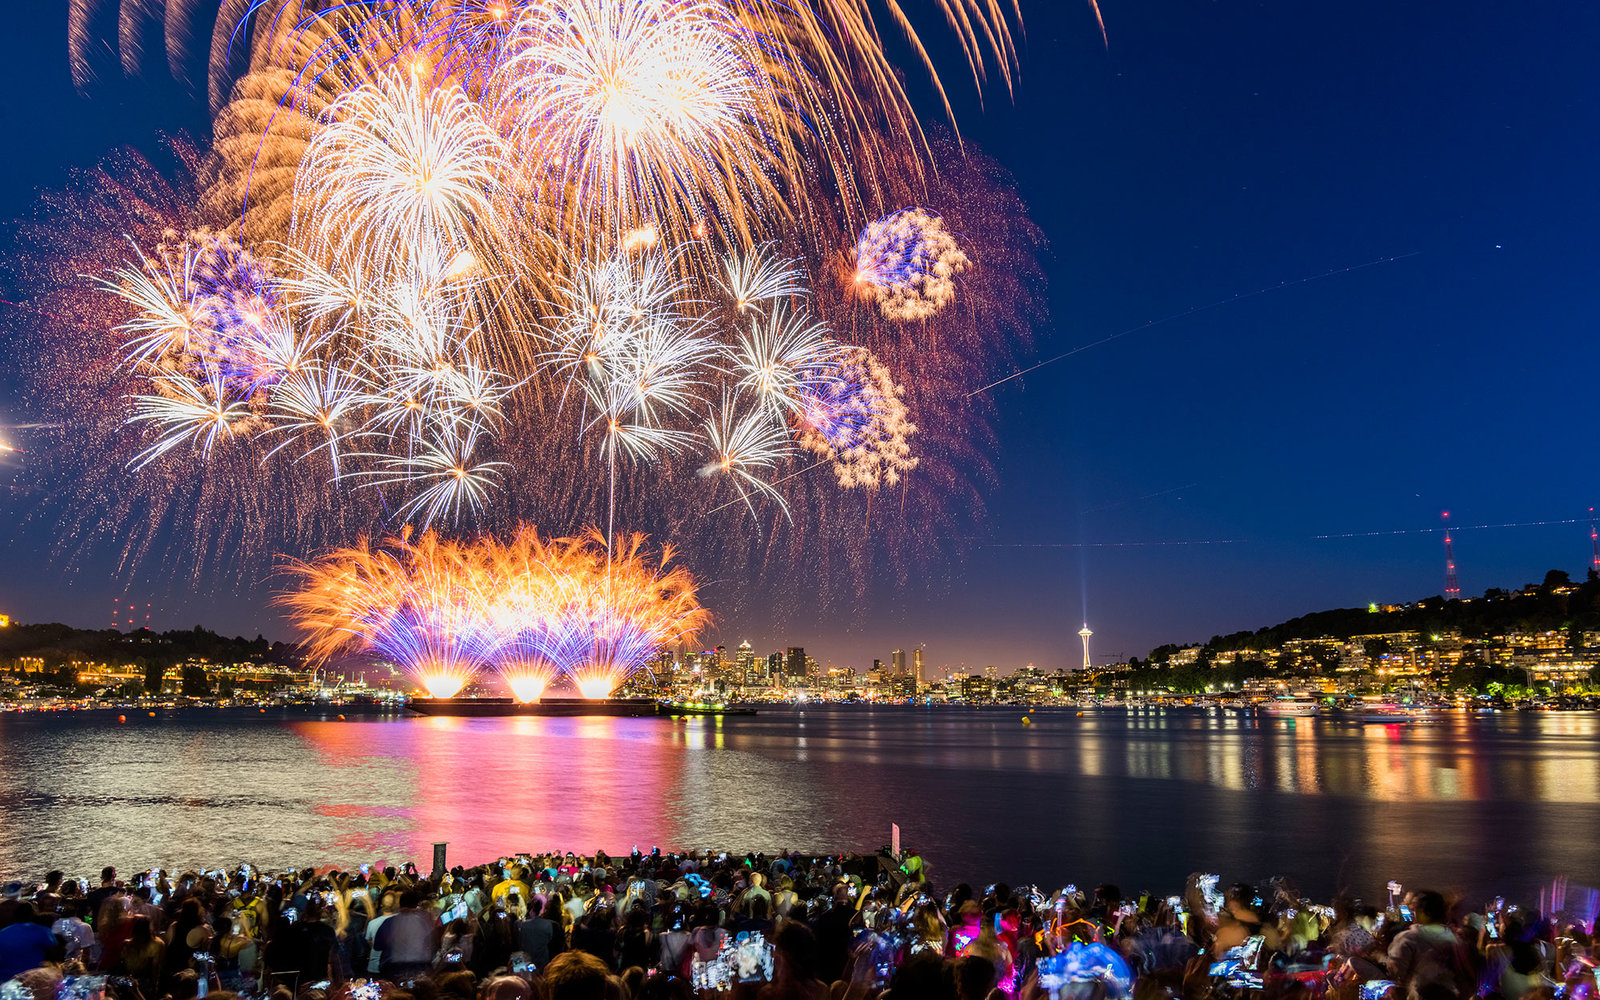 Where To See Fourth Of July Fireworks In The Northwest - OPB